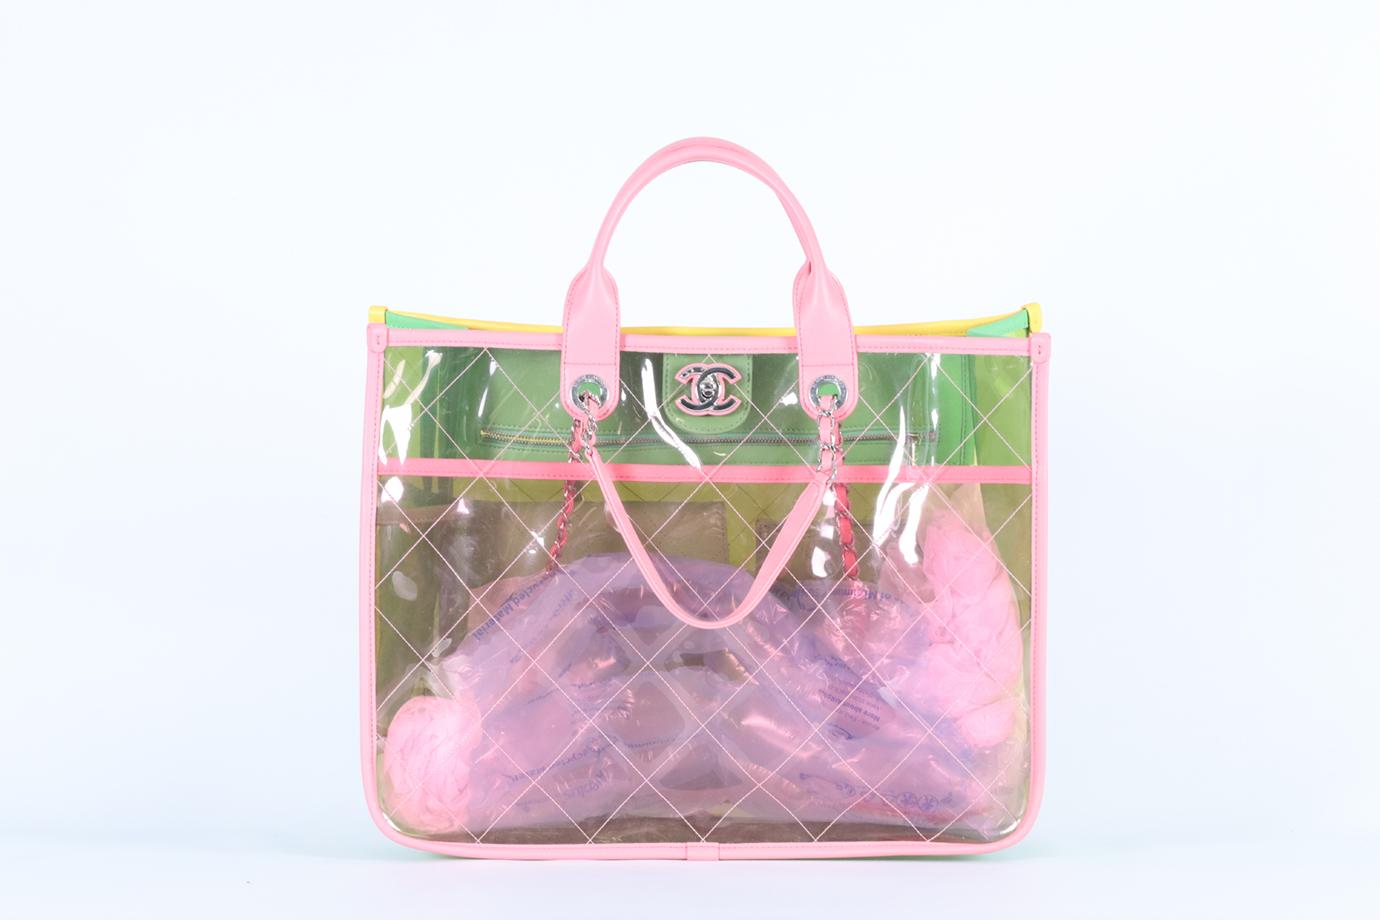 <ul>
<li>Chanel 2018 Coco Splash Quilted Perspex And Leather Tote Bag.</li>
<li>Pink, green and yellow.</li>
<li>Magnetic fastening - Top.</li>
<li>Comes with Authenticity Card.</li>
<li>Does not come with - dustbag or box.</li>
<li><strong>Height: